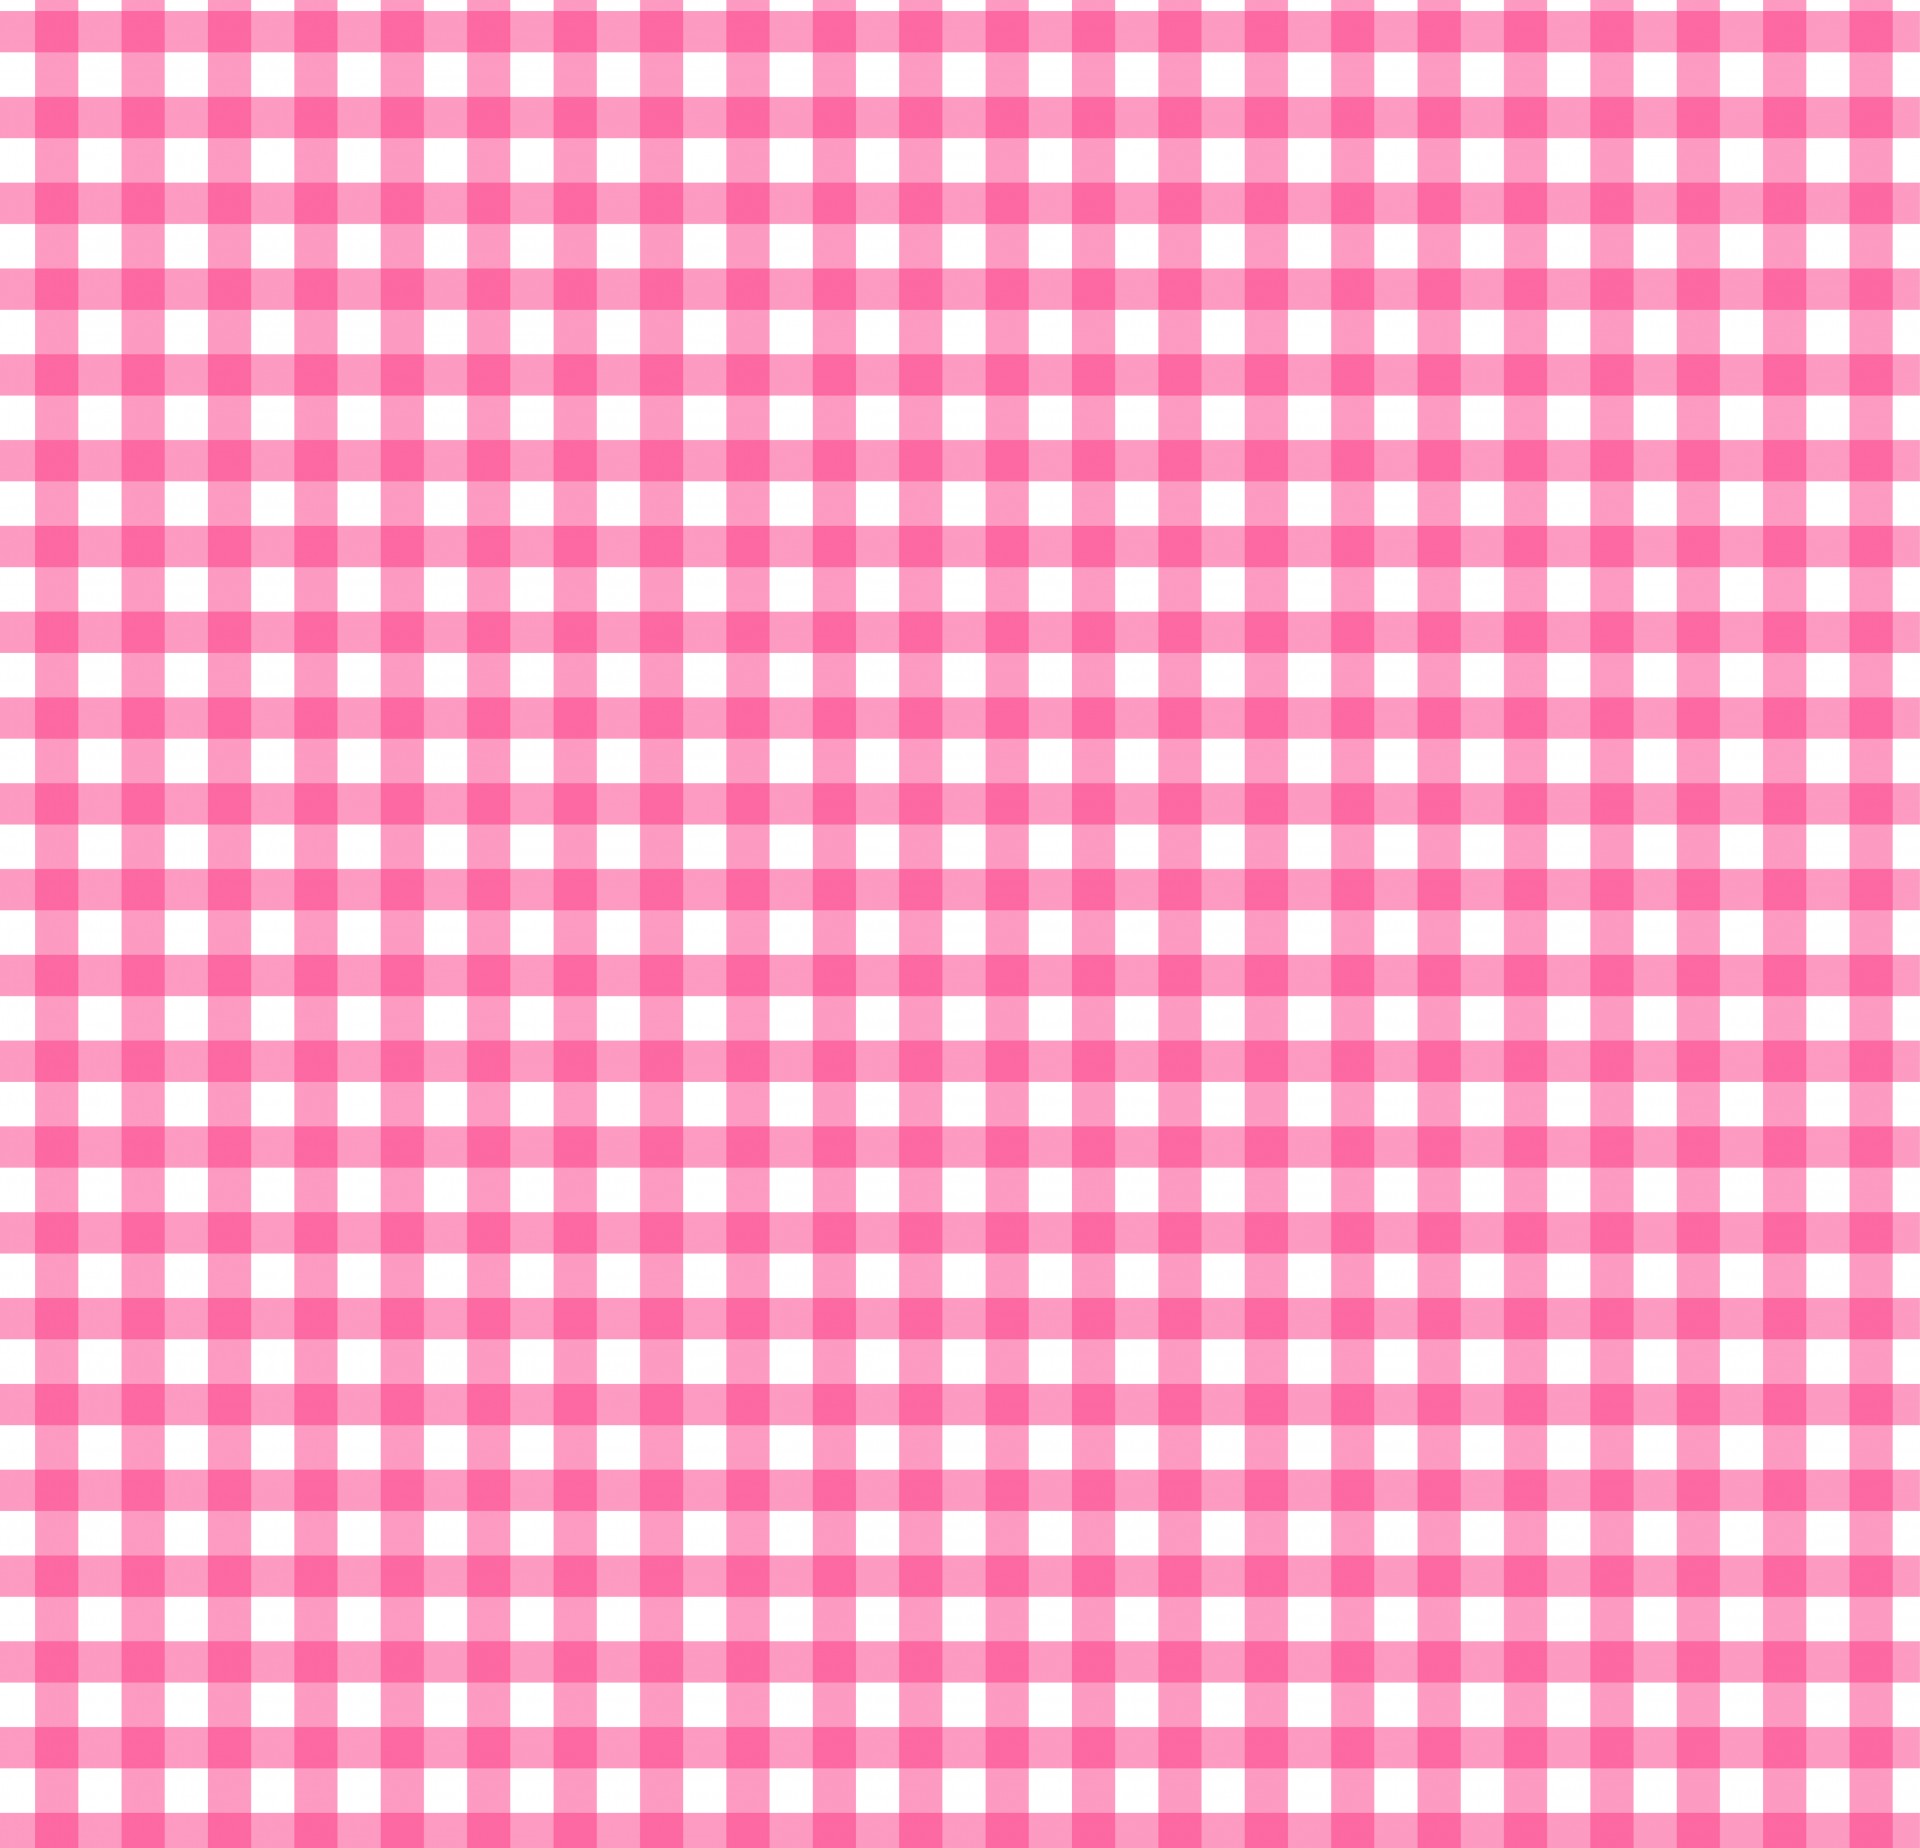 Pink gingham checks background for scrapbooking